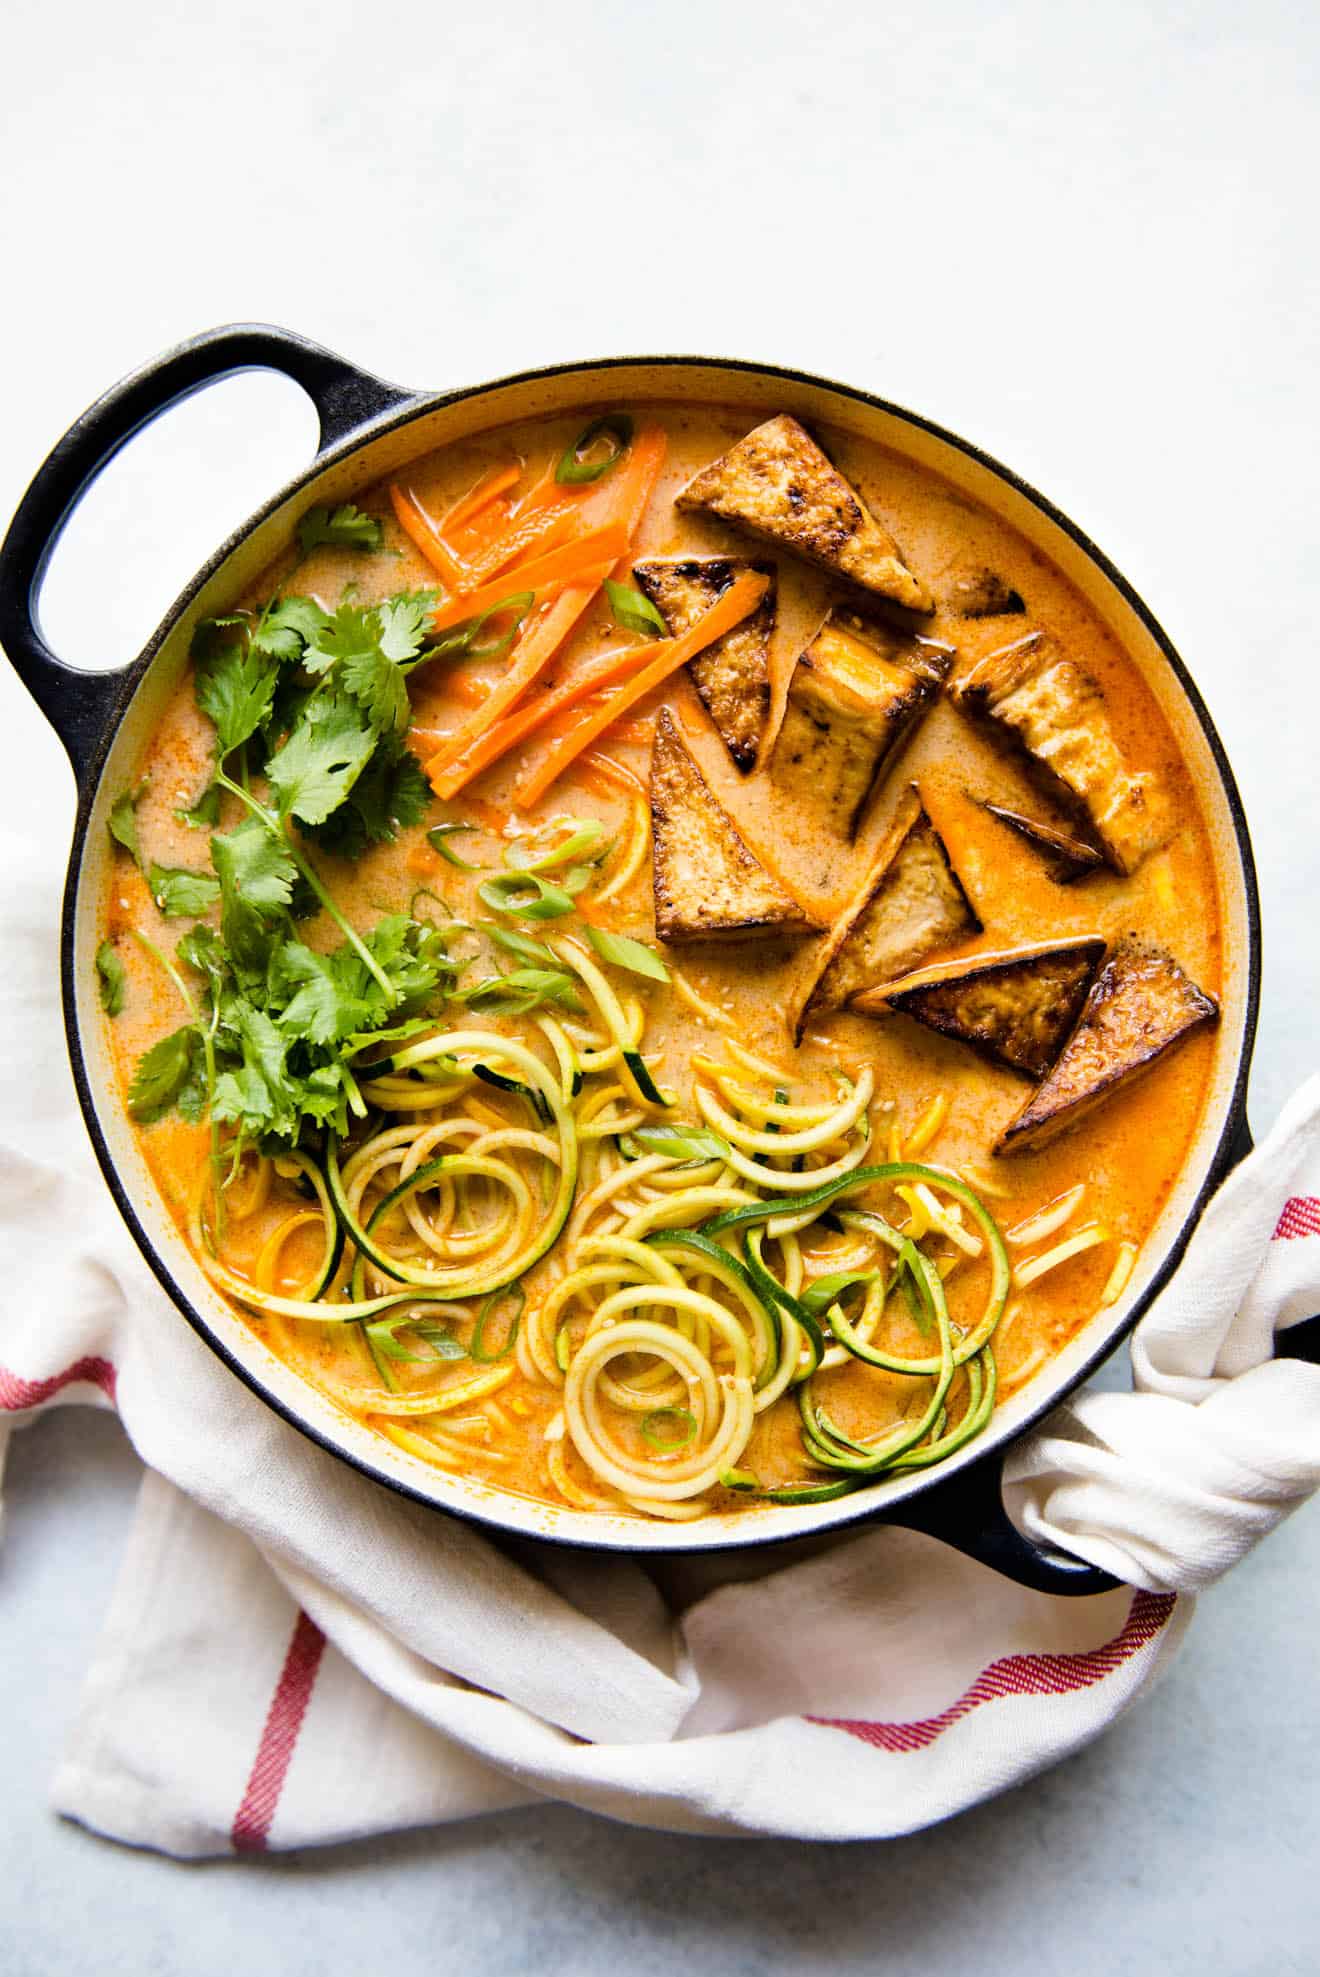 Zucchini Noodles Tomato Coconut Broth and Pan-Seared Tofu - a delicious vegan meal for weeknights